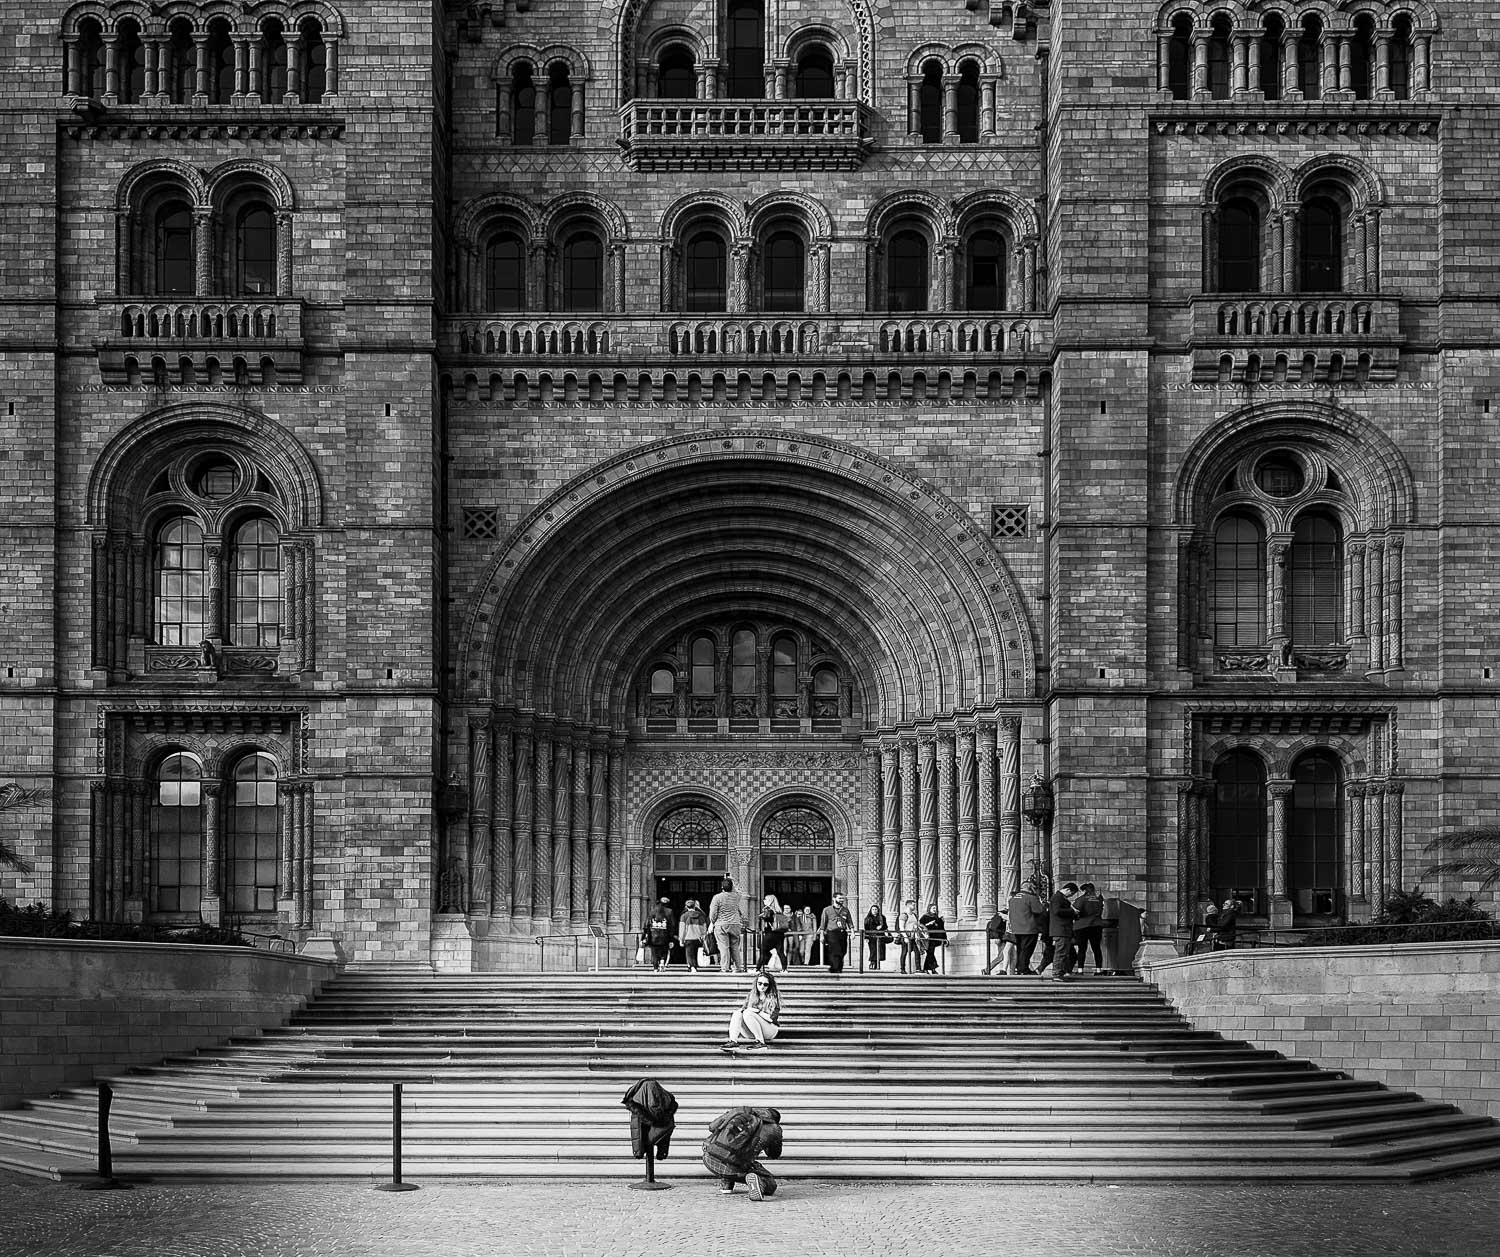 The Photographer &amp; Model, Natural History Museum, London 2019.03.25